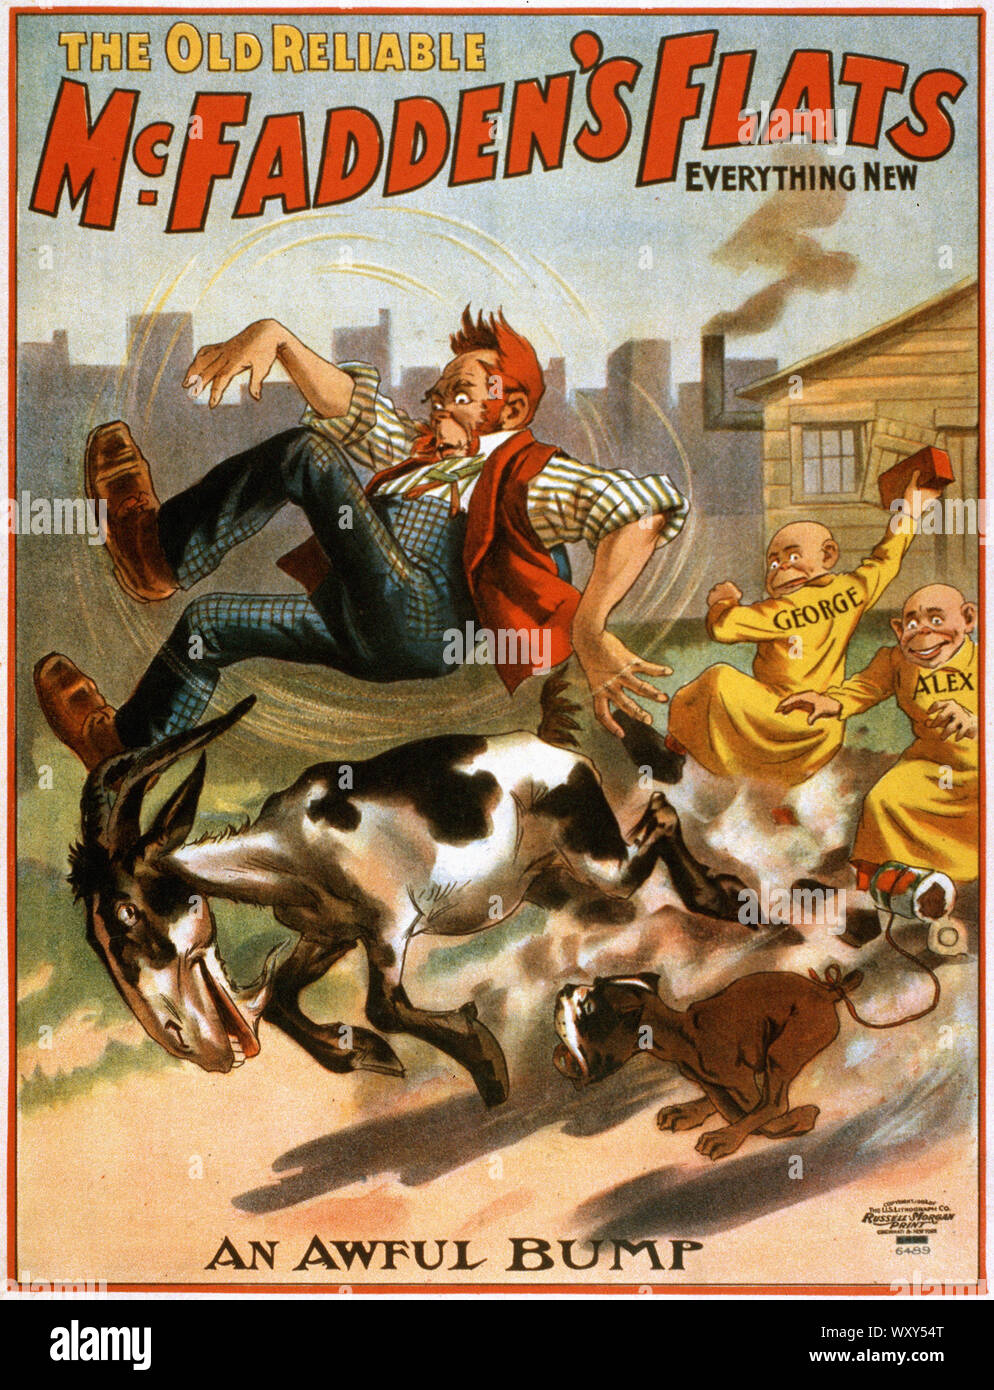 The Old Reliable Mcfaddens Flats Performance Poster 1902 - Vintage Advertising Poster, Victorian Era Stock Photo